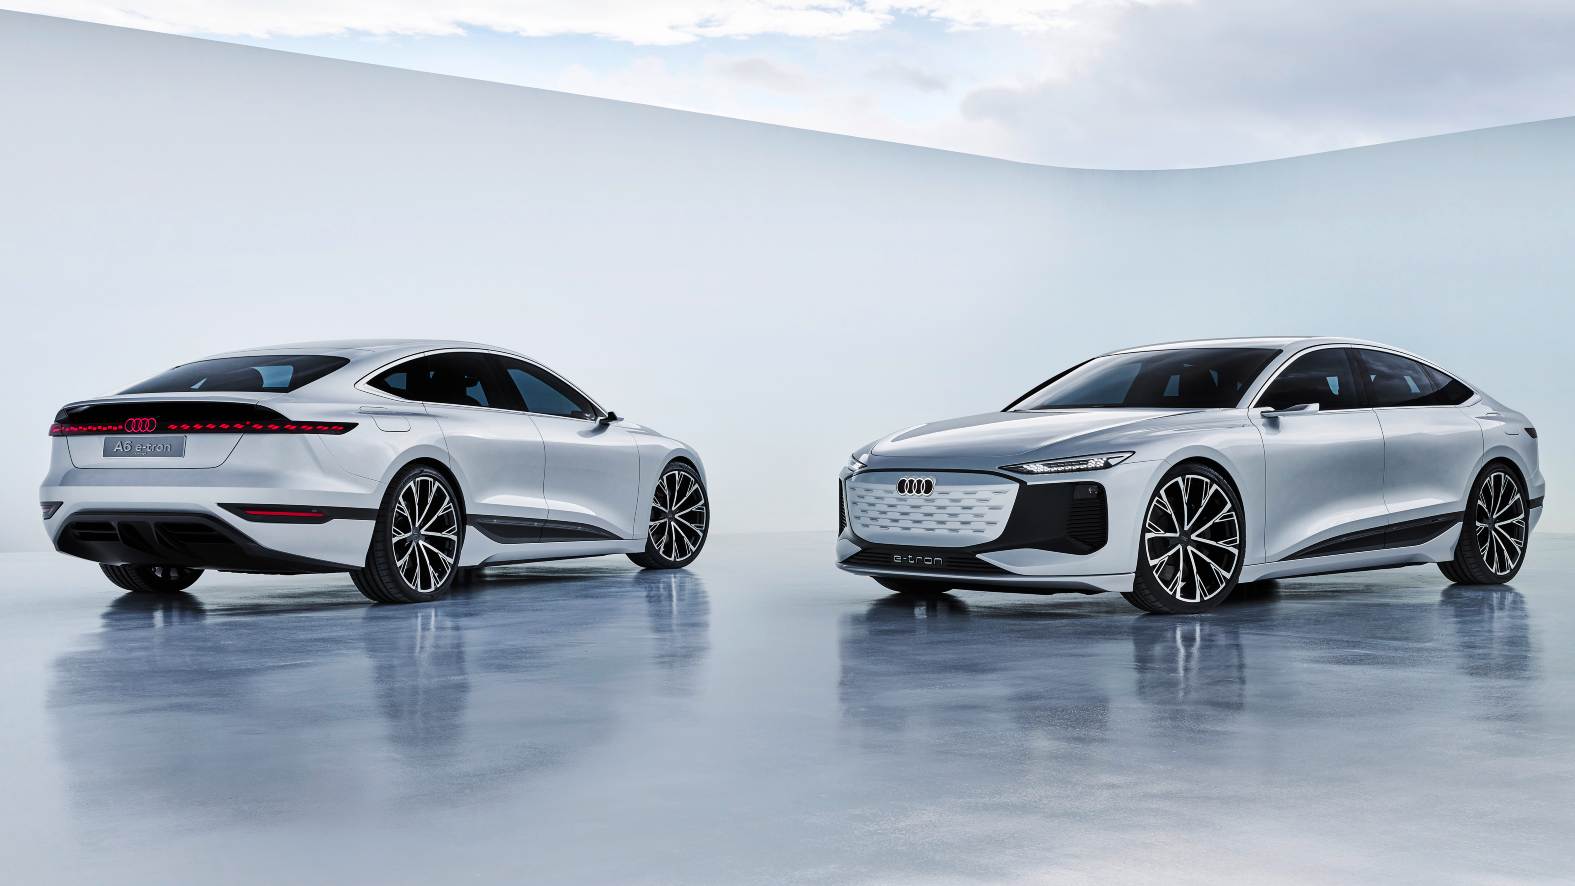 The production version of the Audi A6 e-tron concept is expected to arrive in 2023. Image: Audi